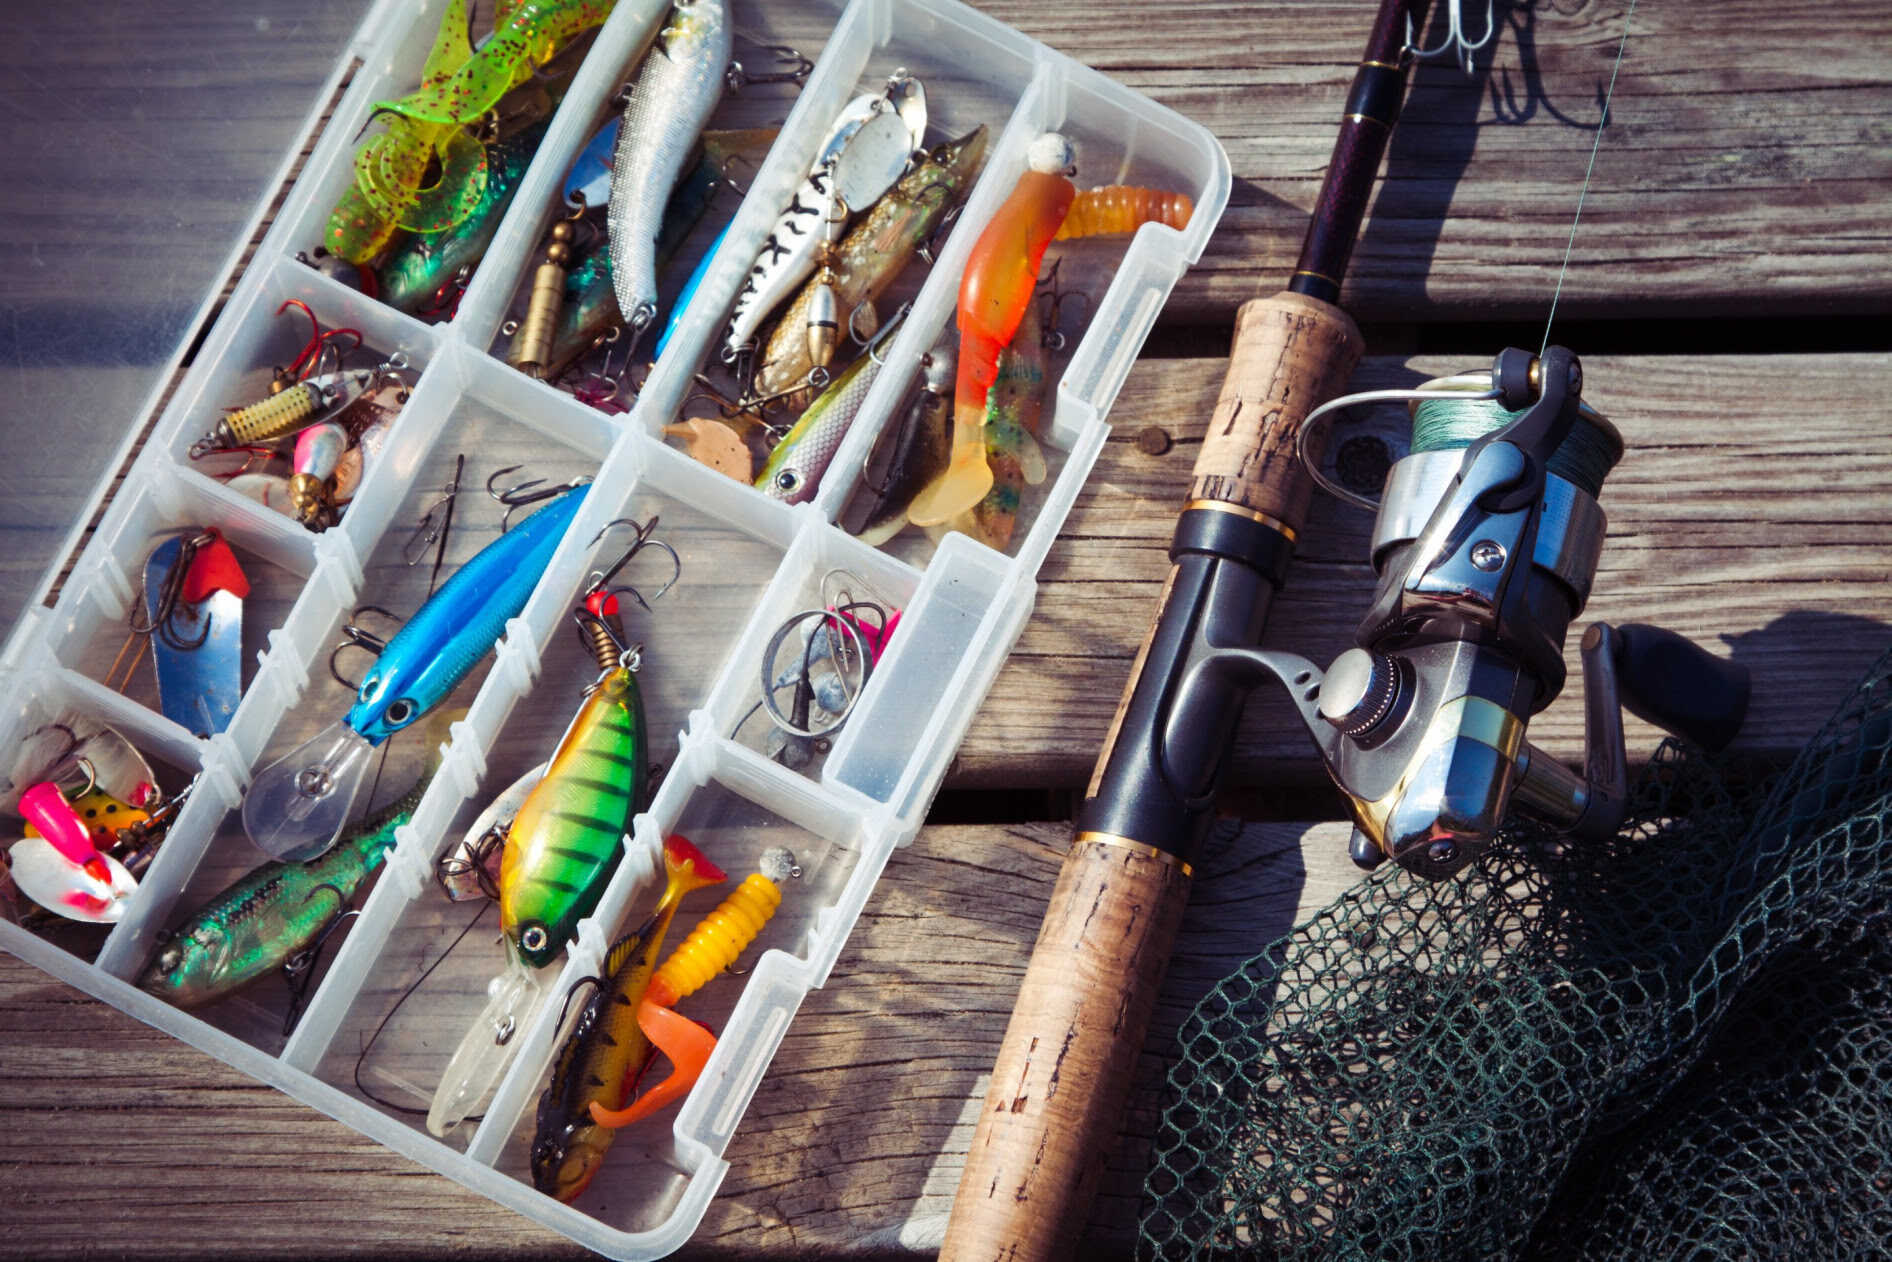 Top Fishing Gear Review: Must-Have Equipment for Anglers